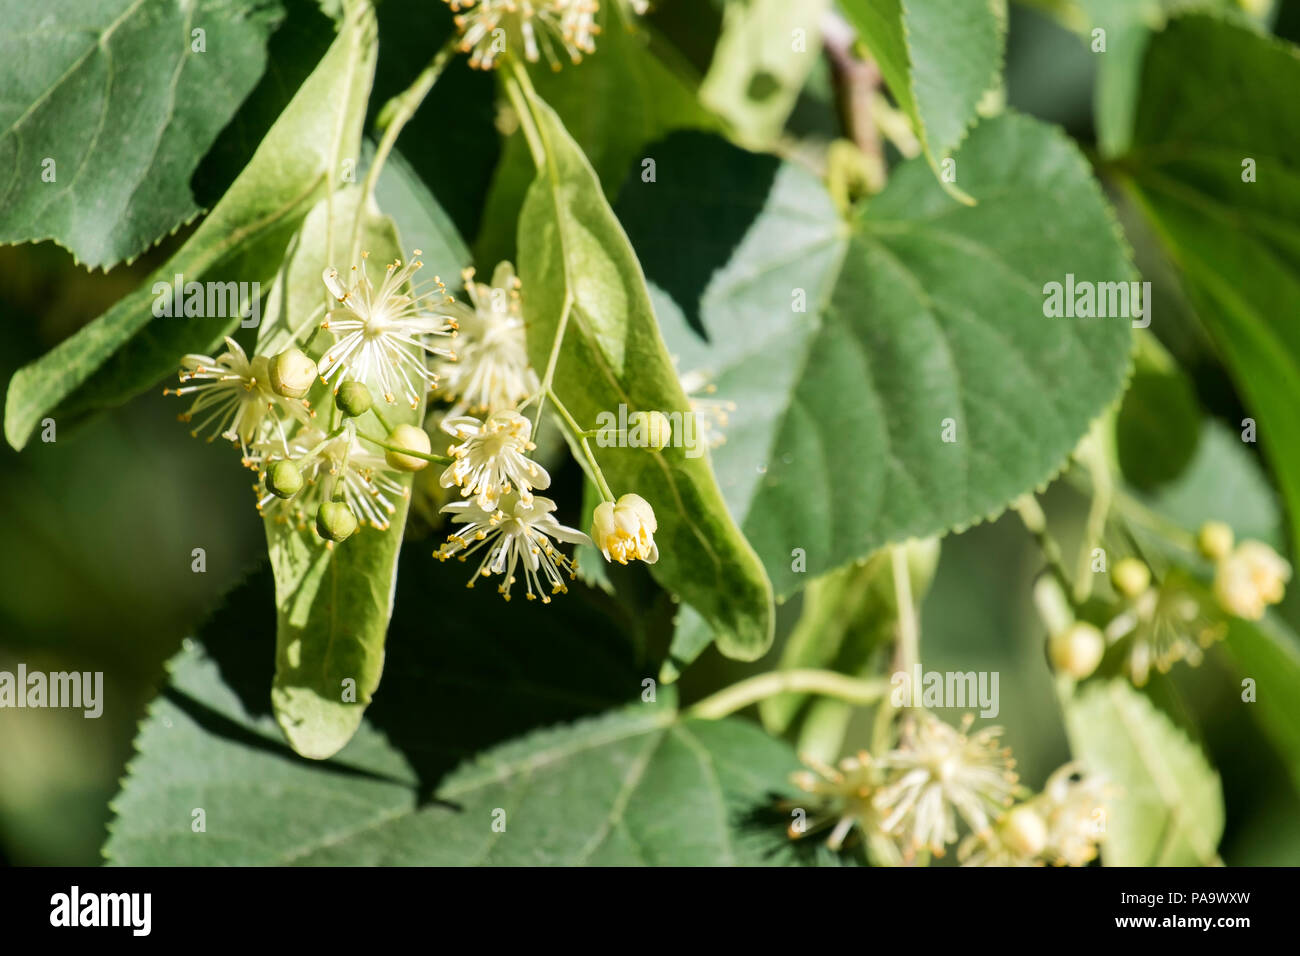 Linden blossom. Flowers and leaves of linden (Tília) Stock Photo